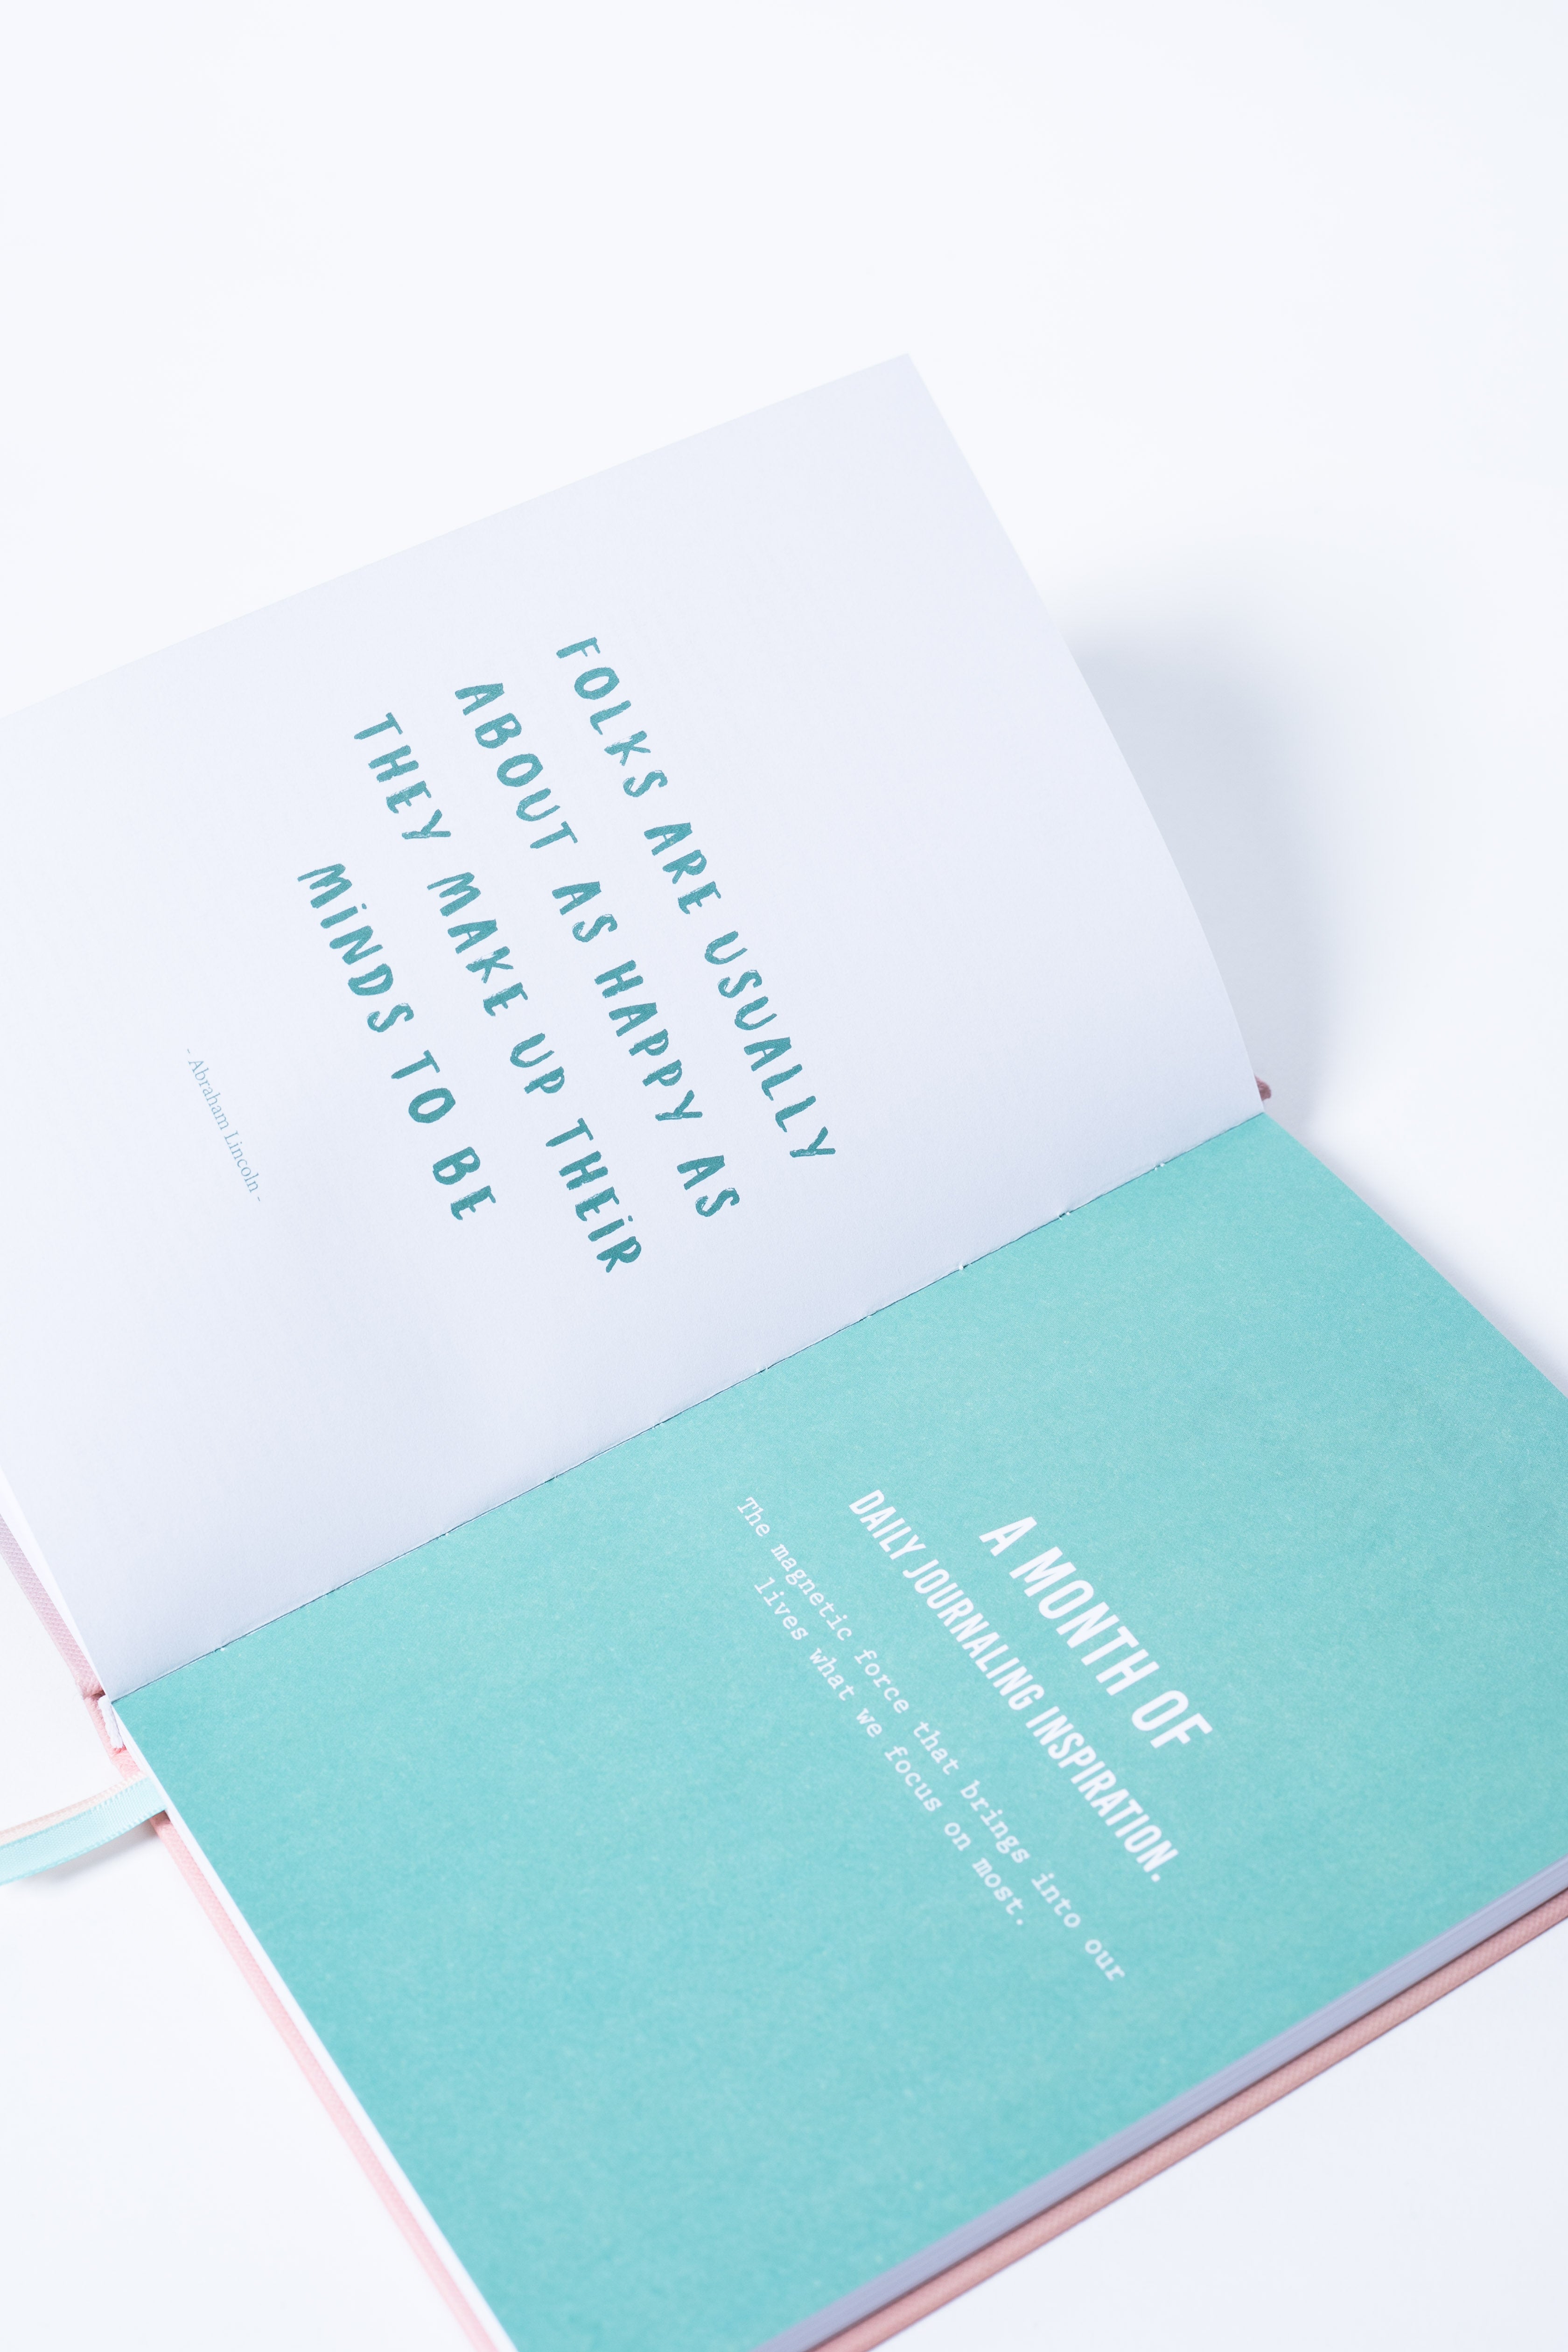 Explore Your Inner World | Guided Journal Set I - The Happiness Planner®